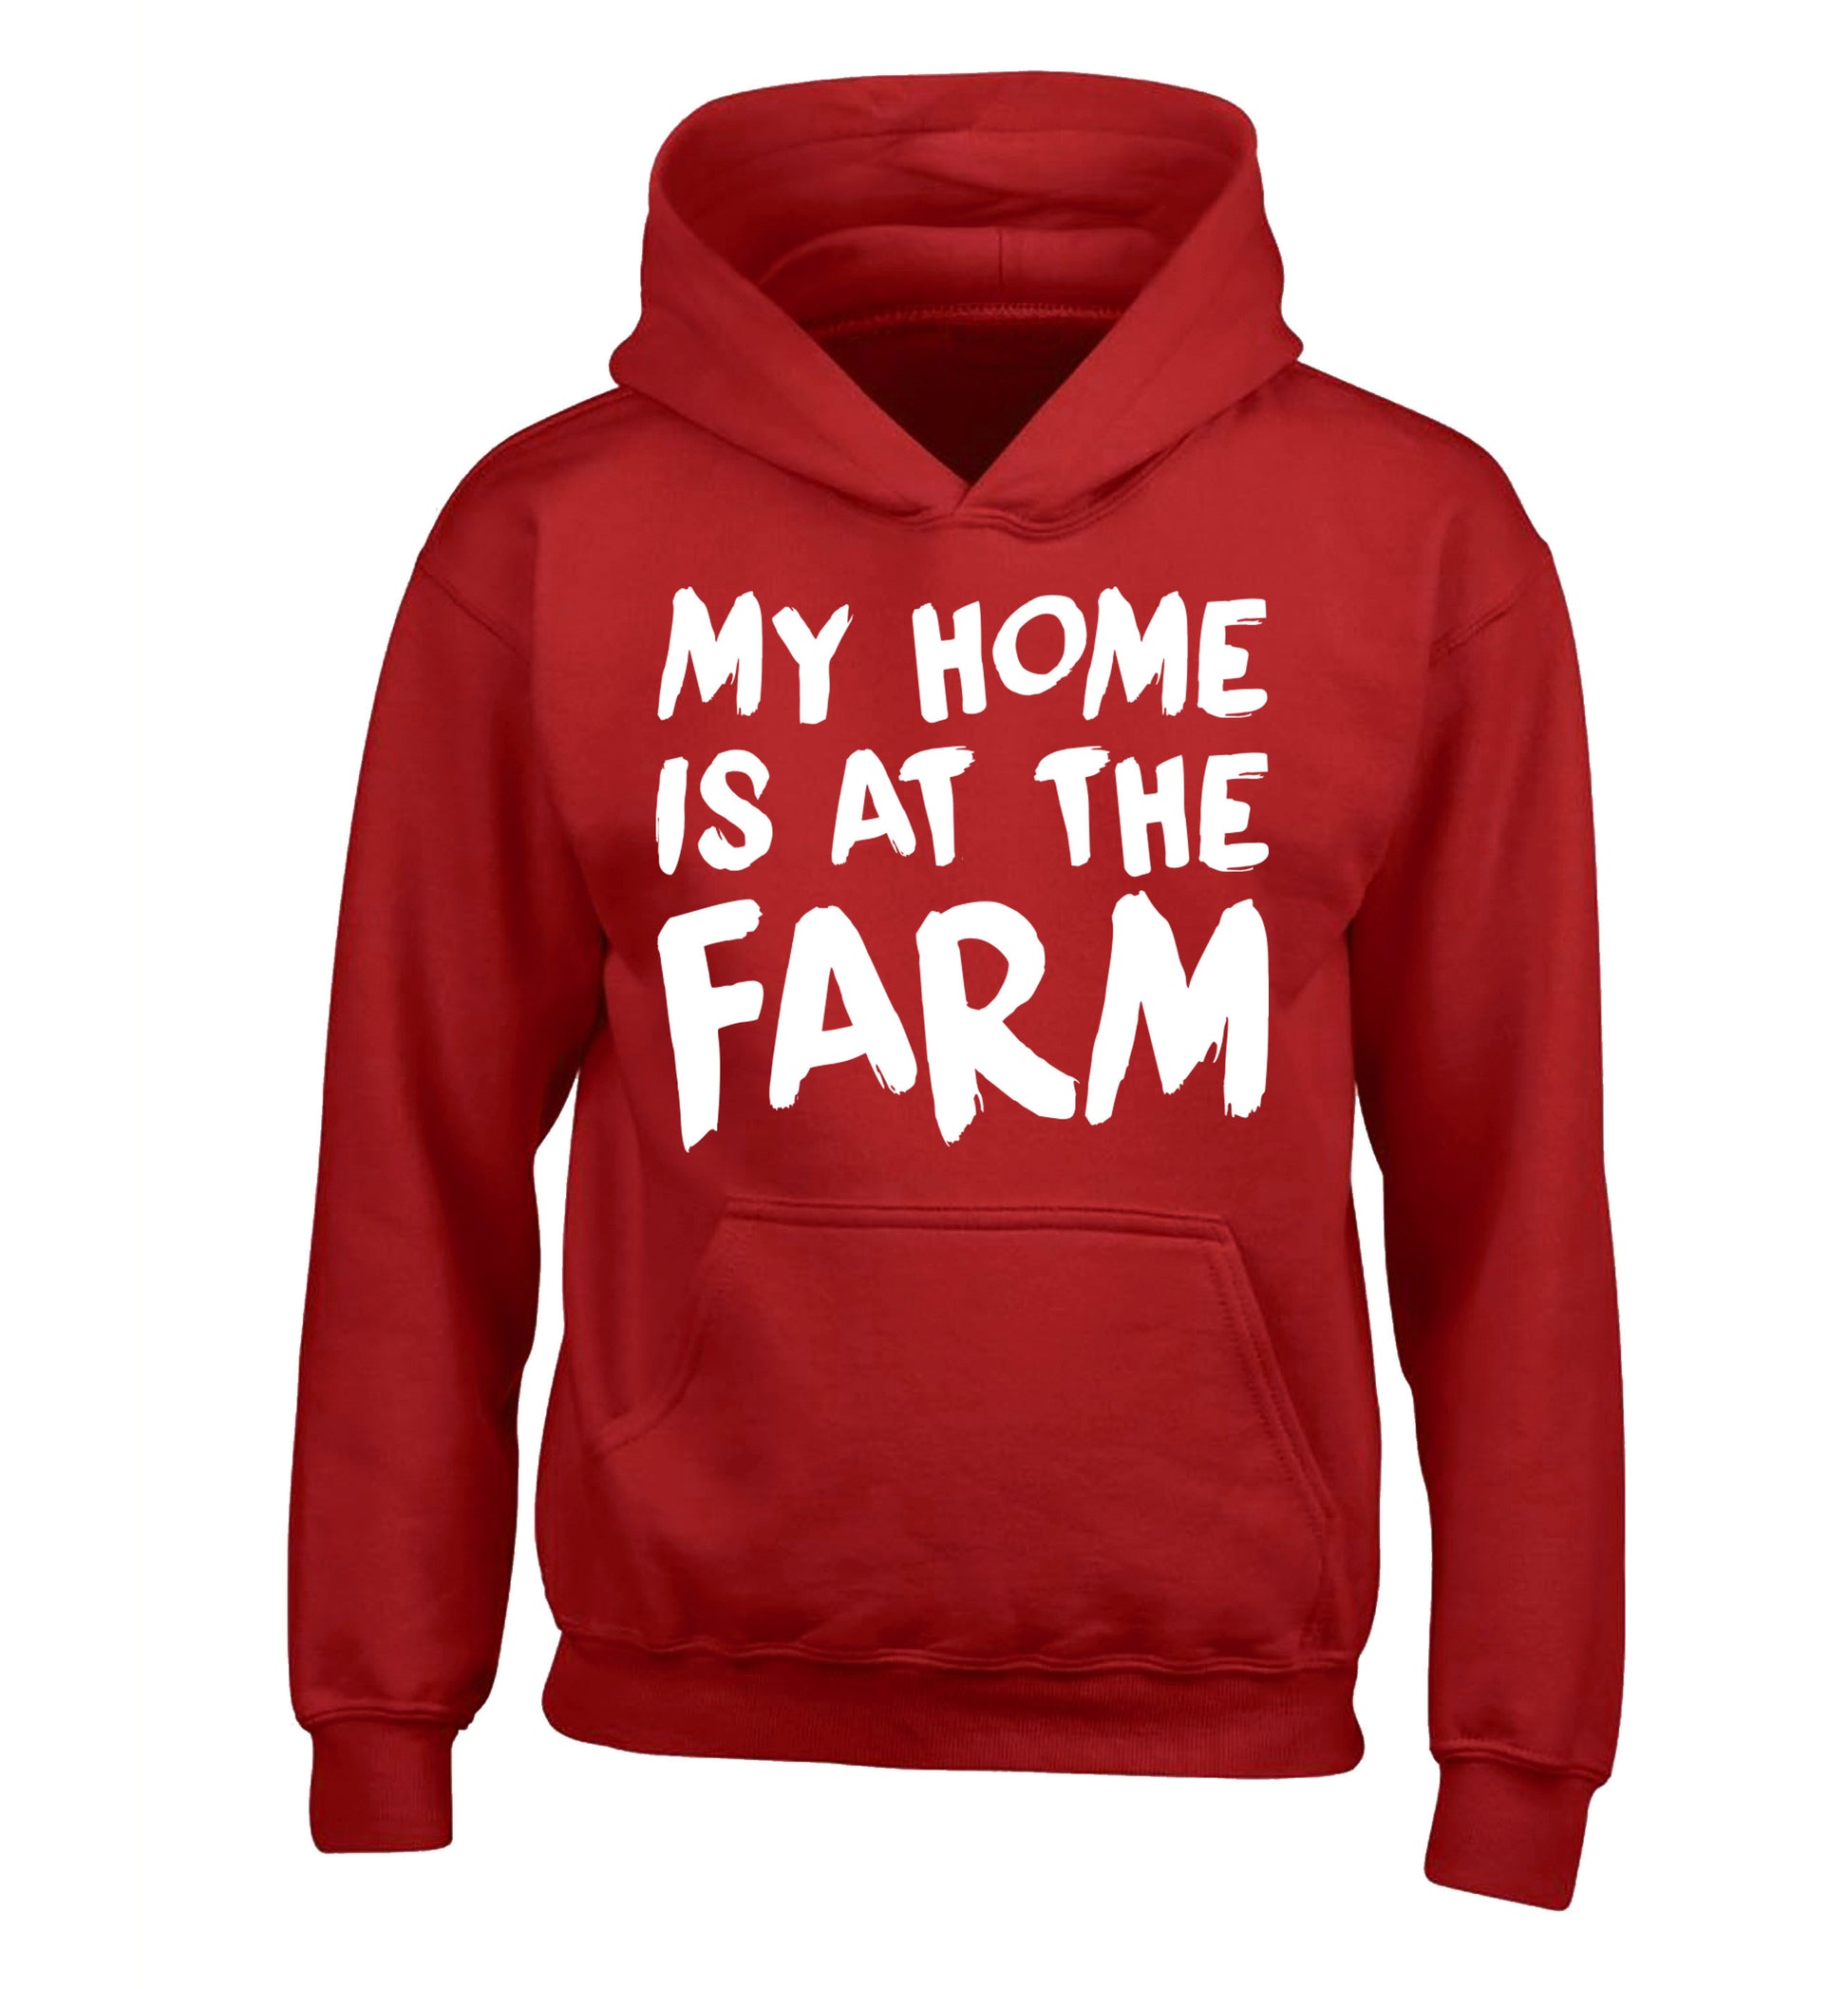 My home is at the farm children's red hoodie 12-14 Years